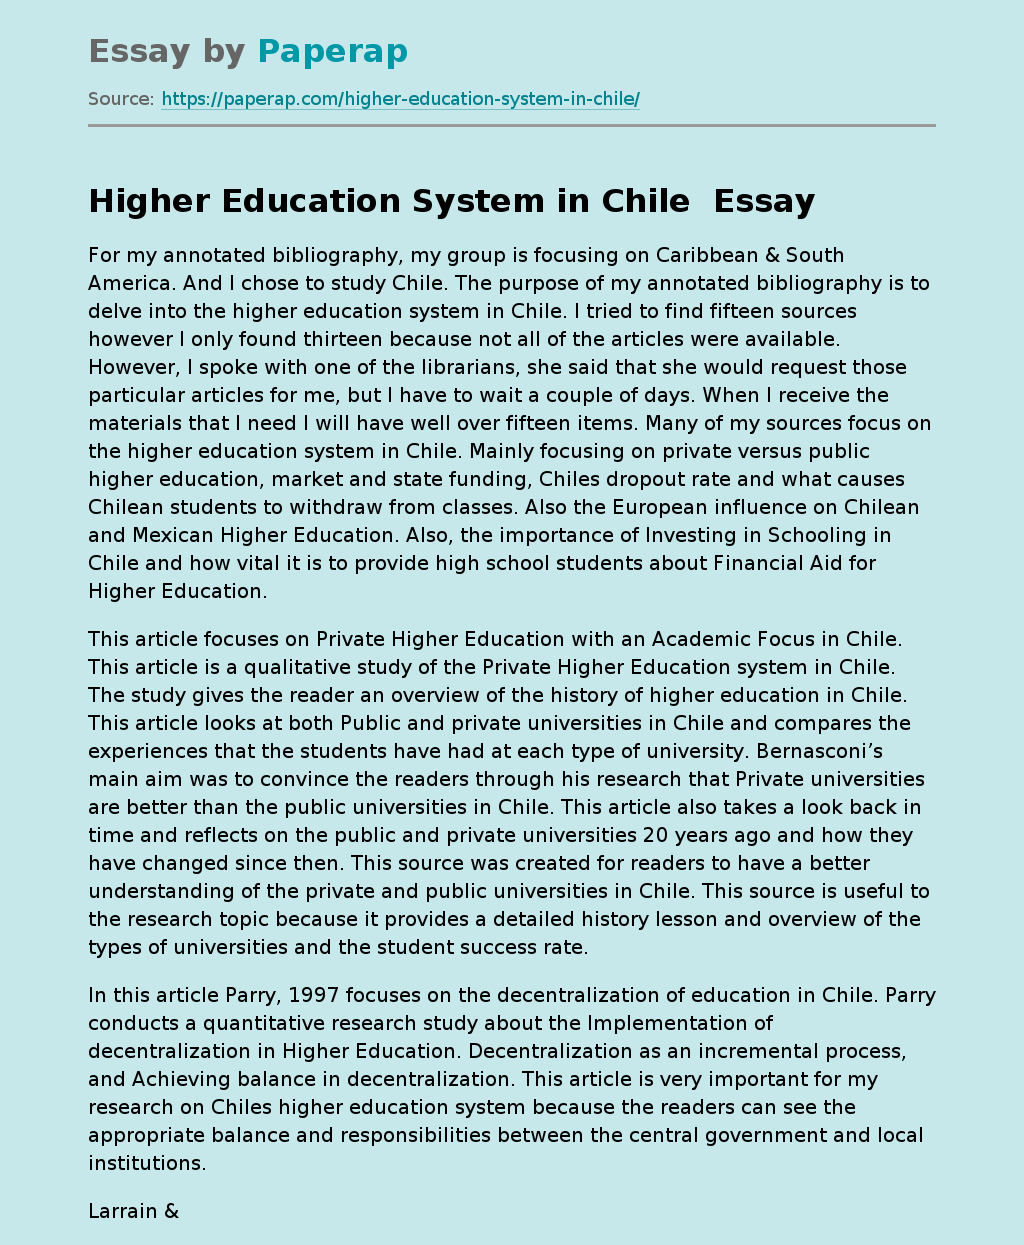 Higher Education System in Chile 